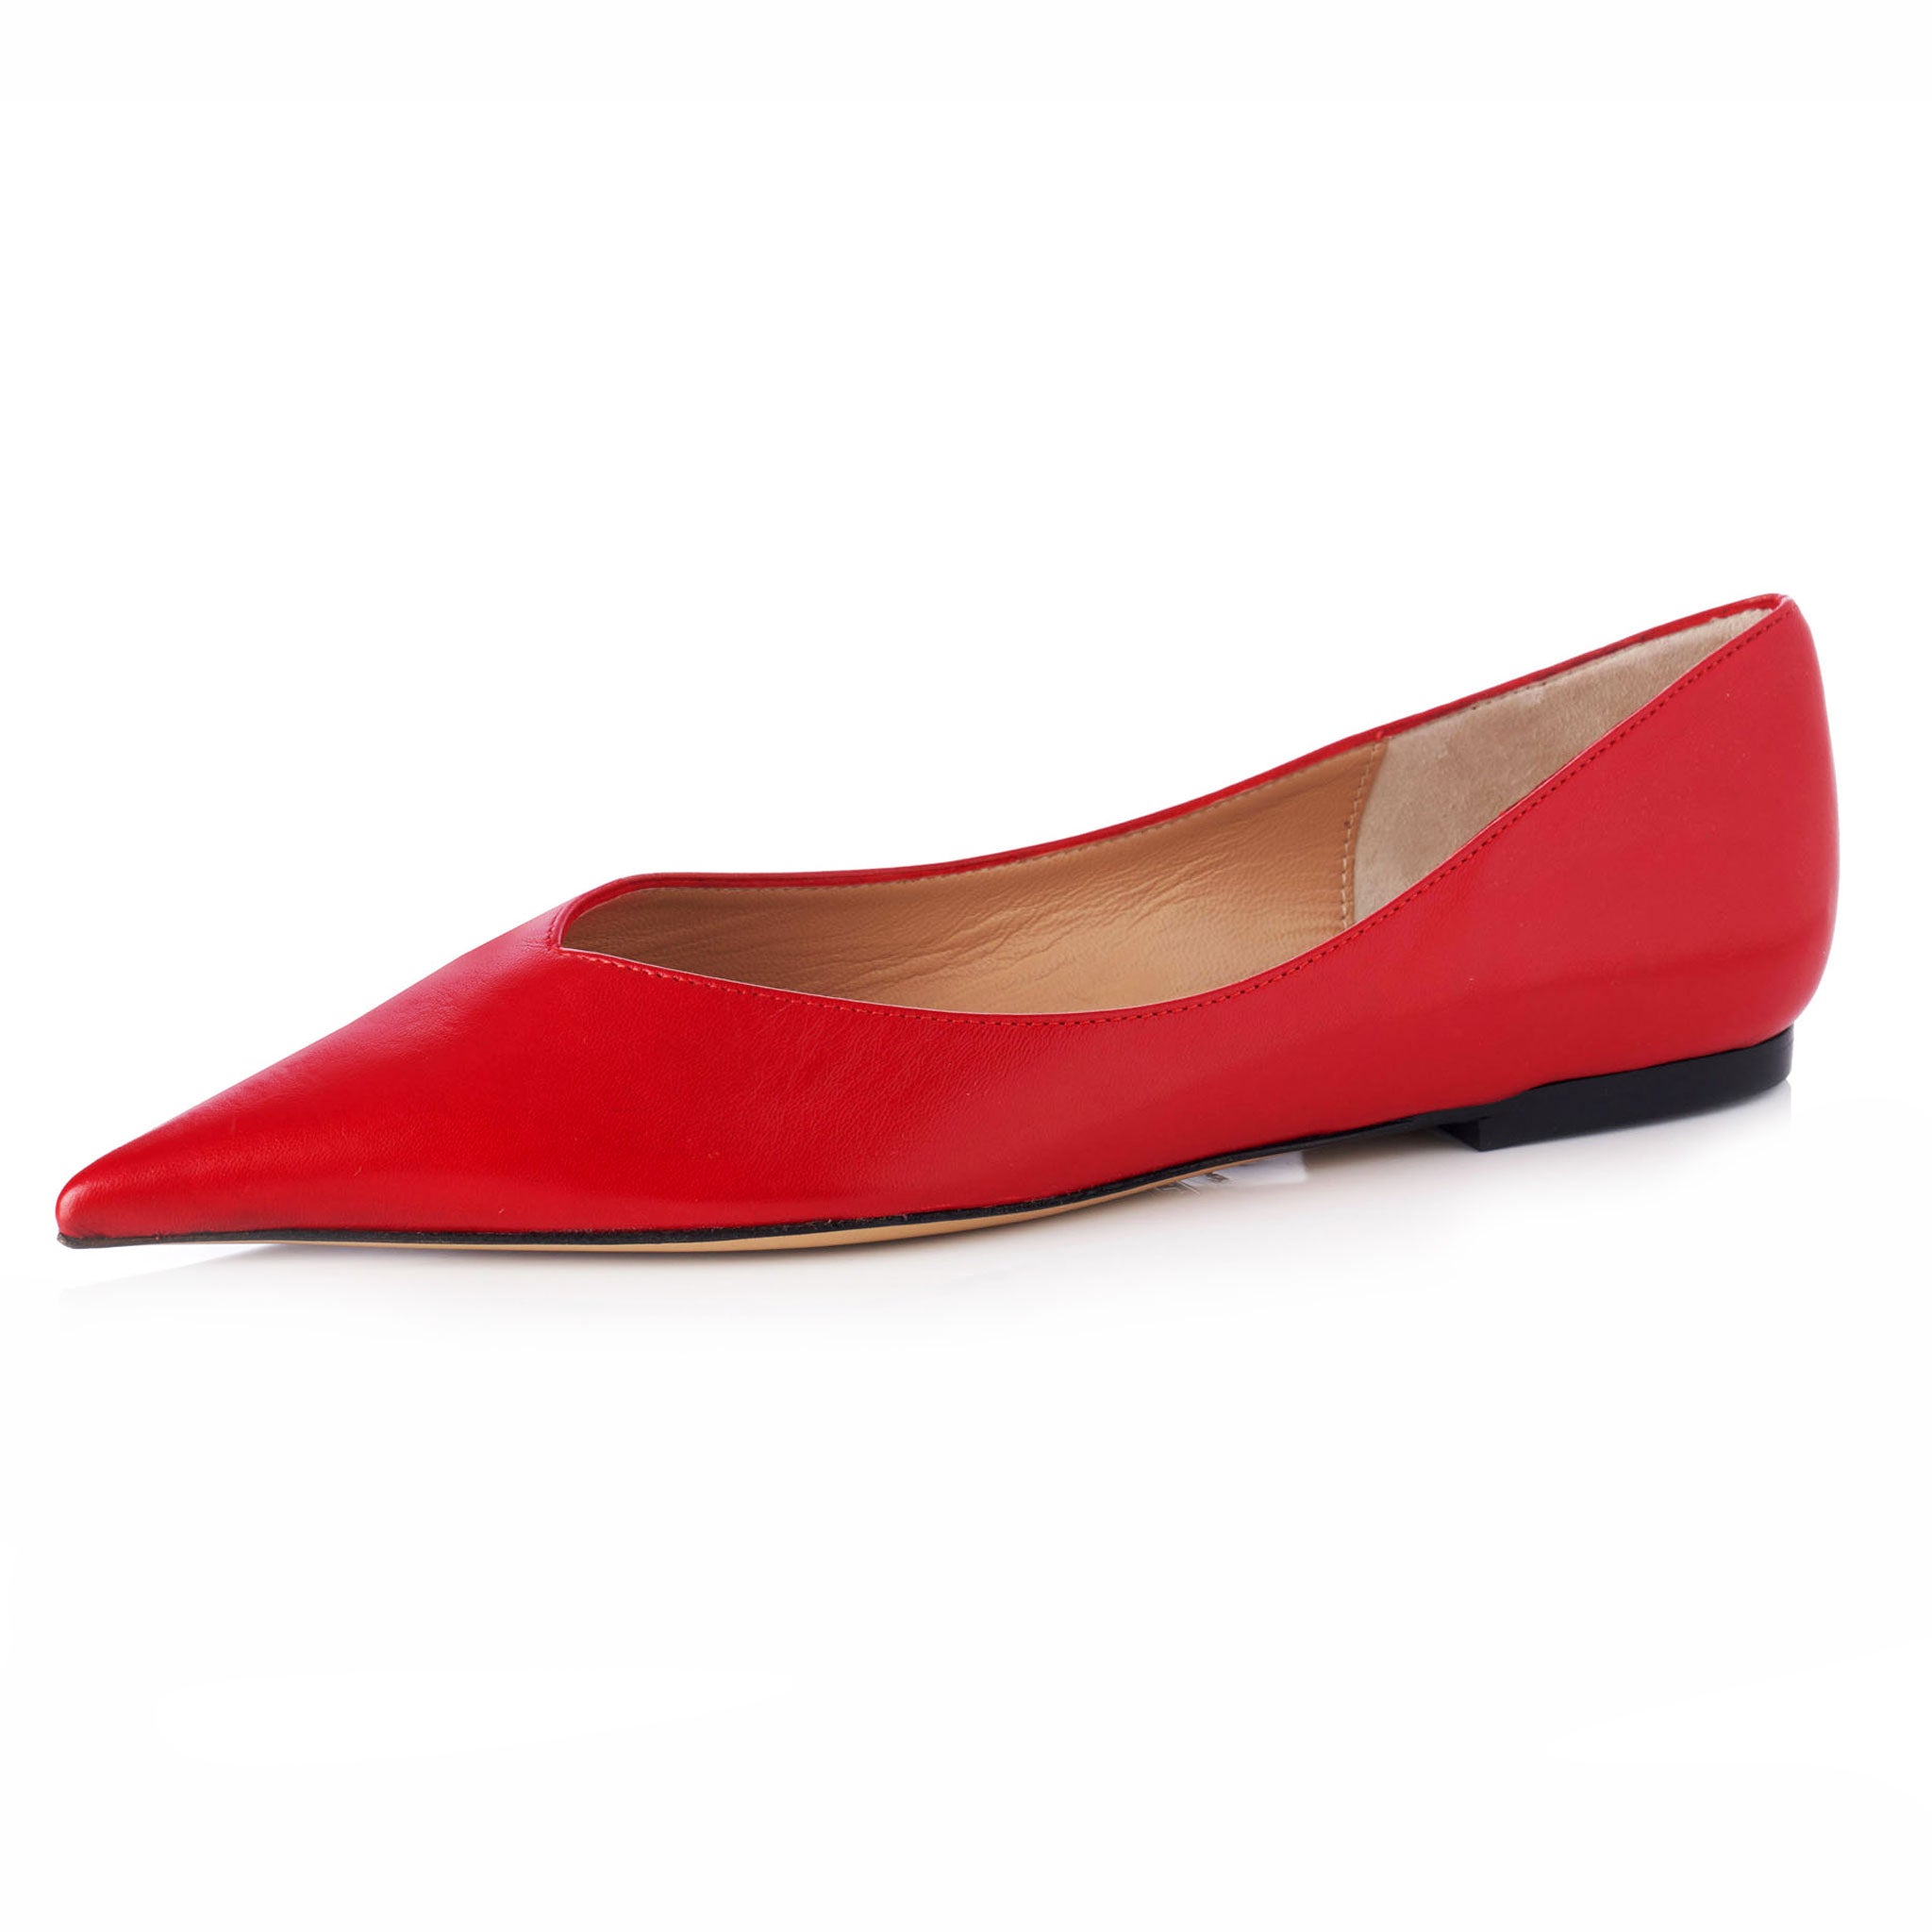 cherry red pointed leather luxury flats shoes with valentine cut at vamp